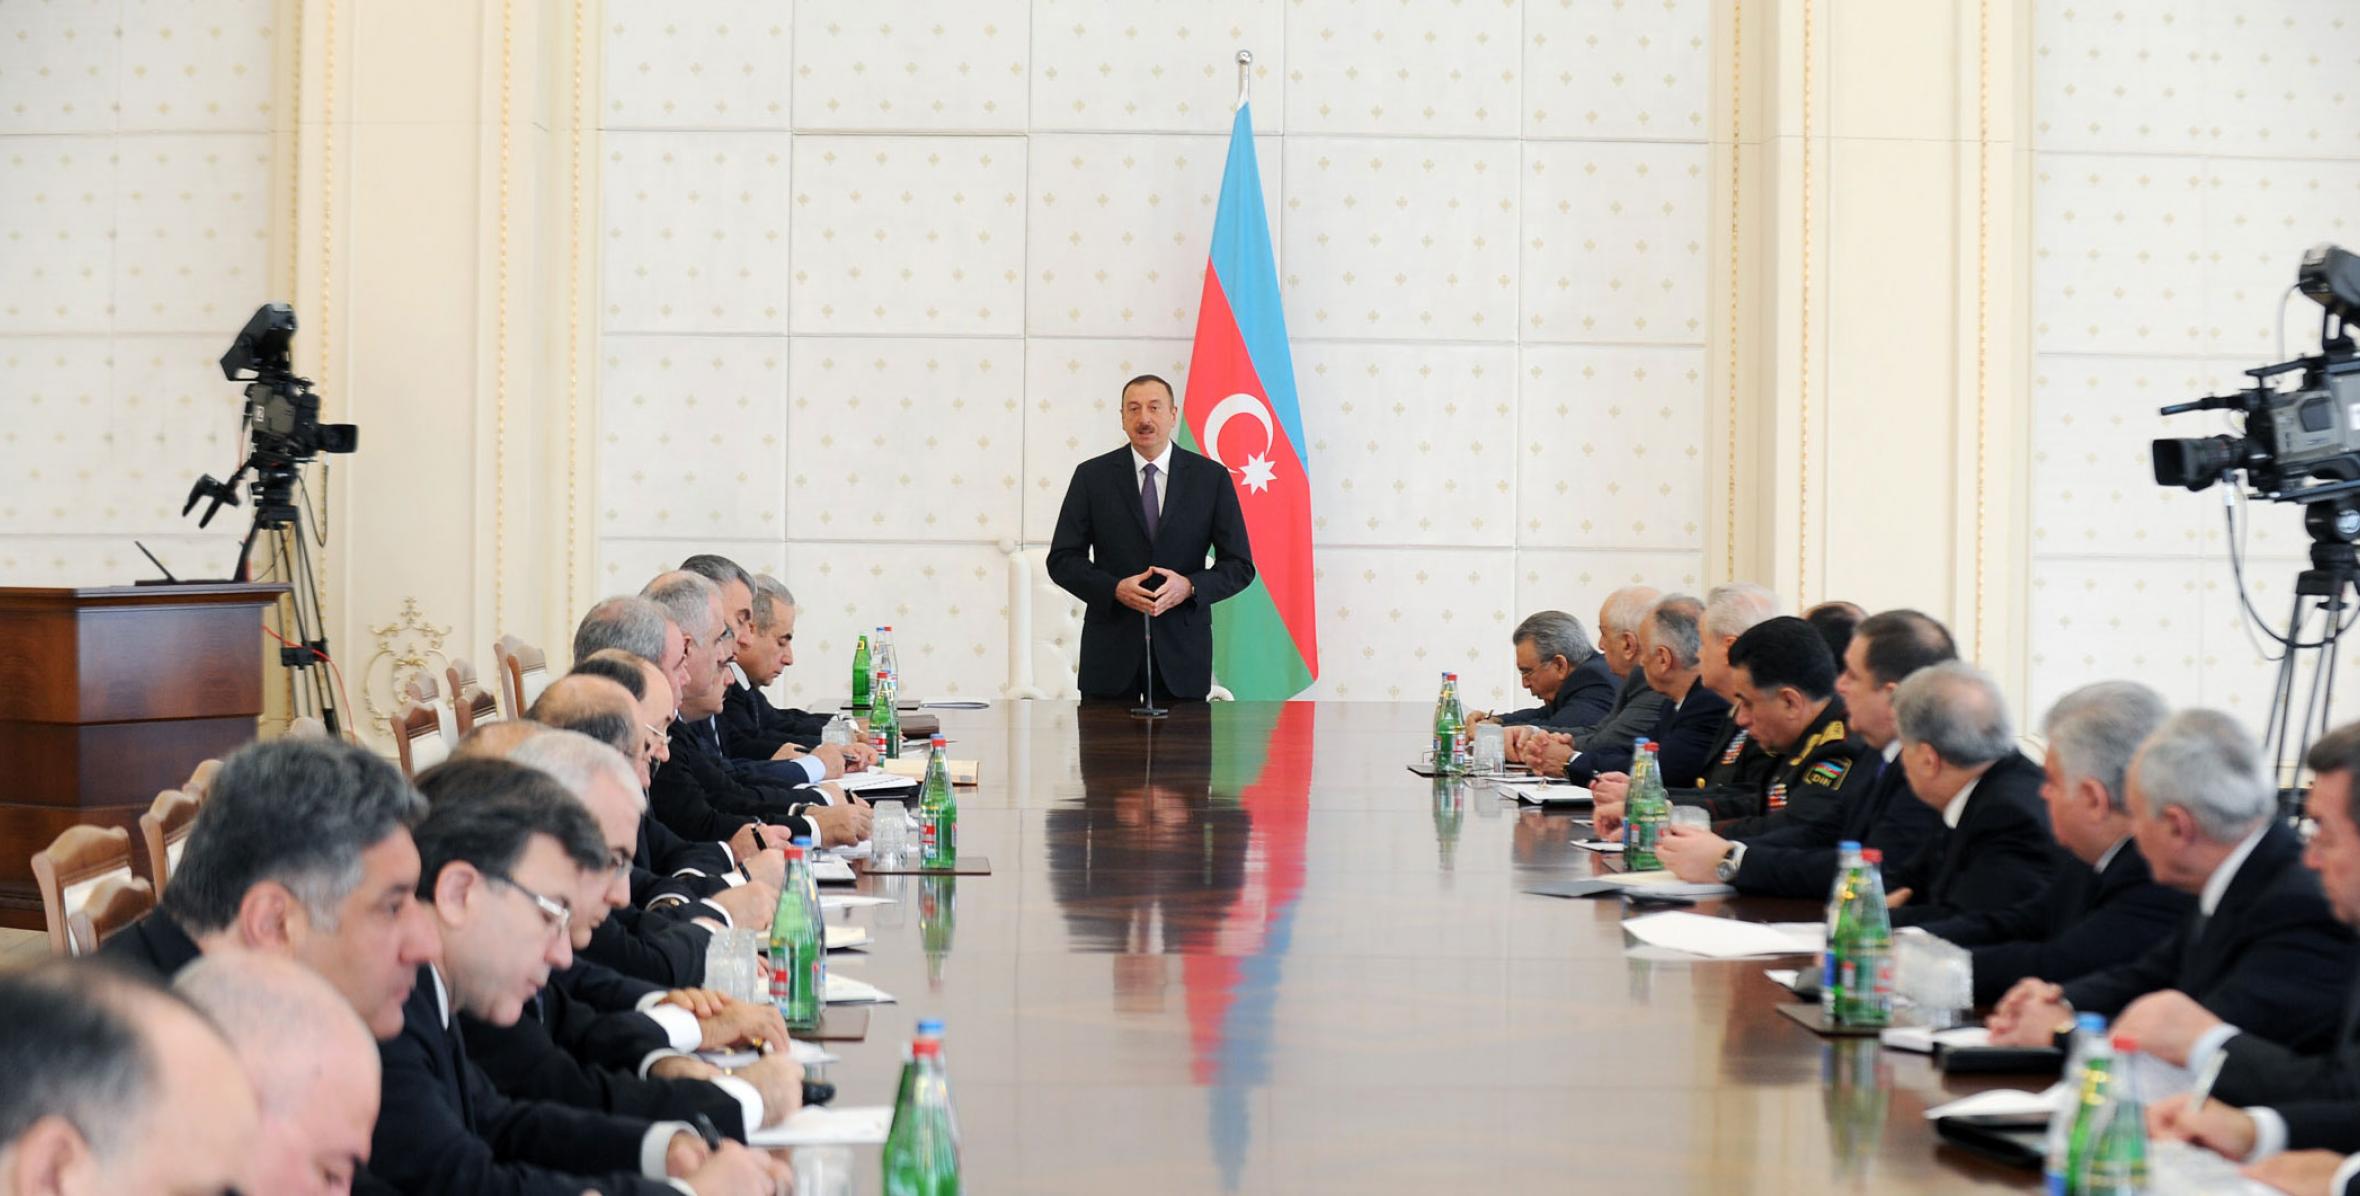 Ilham Aliyev chaired a meeting of the Cabinet of Ministers on the results of socioeconomic development in 2011